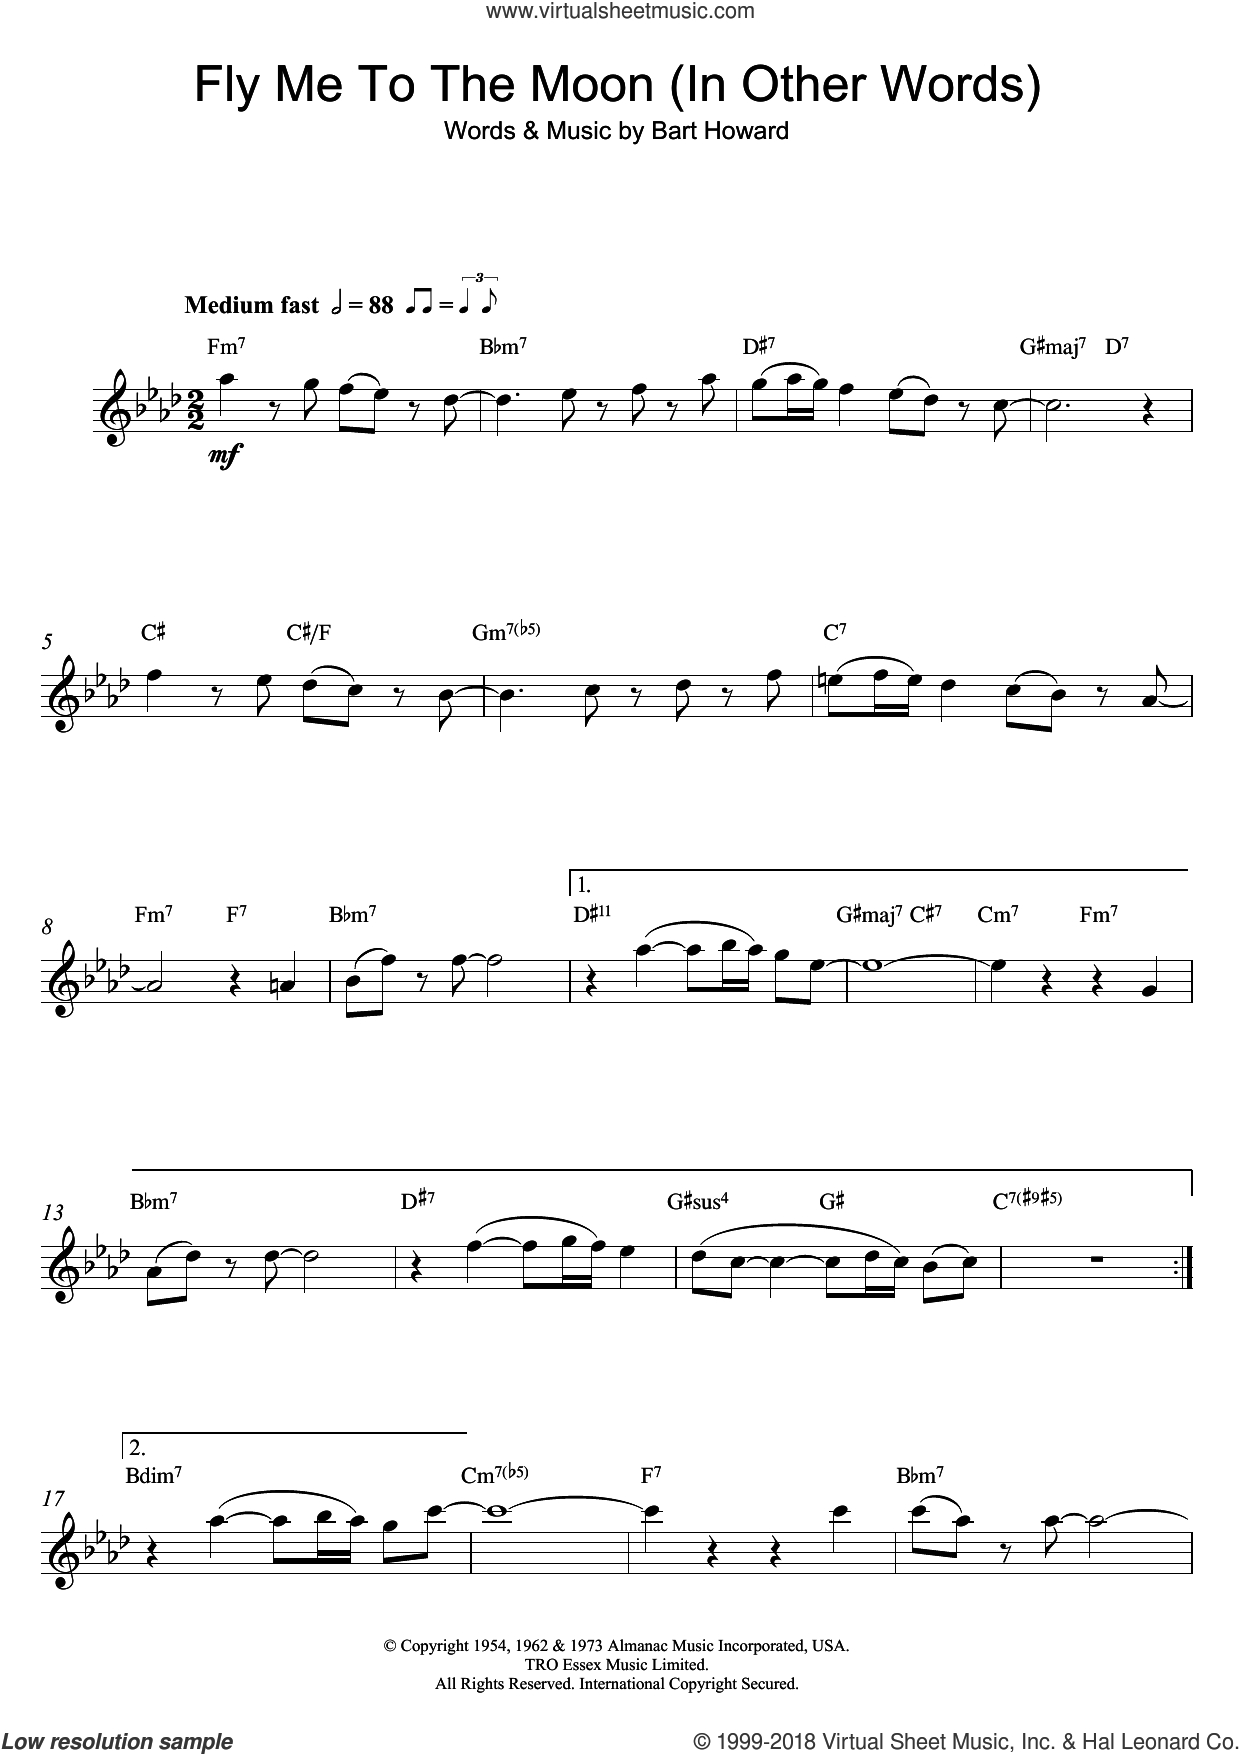 Fly Me To The Moon Chords Sinatra Fly Me To The Moon In Other Words Sheet Music For Flute Solo